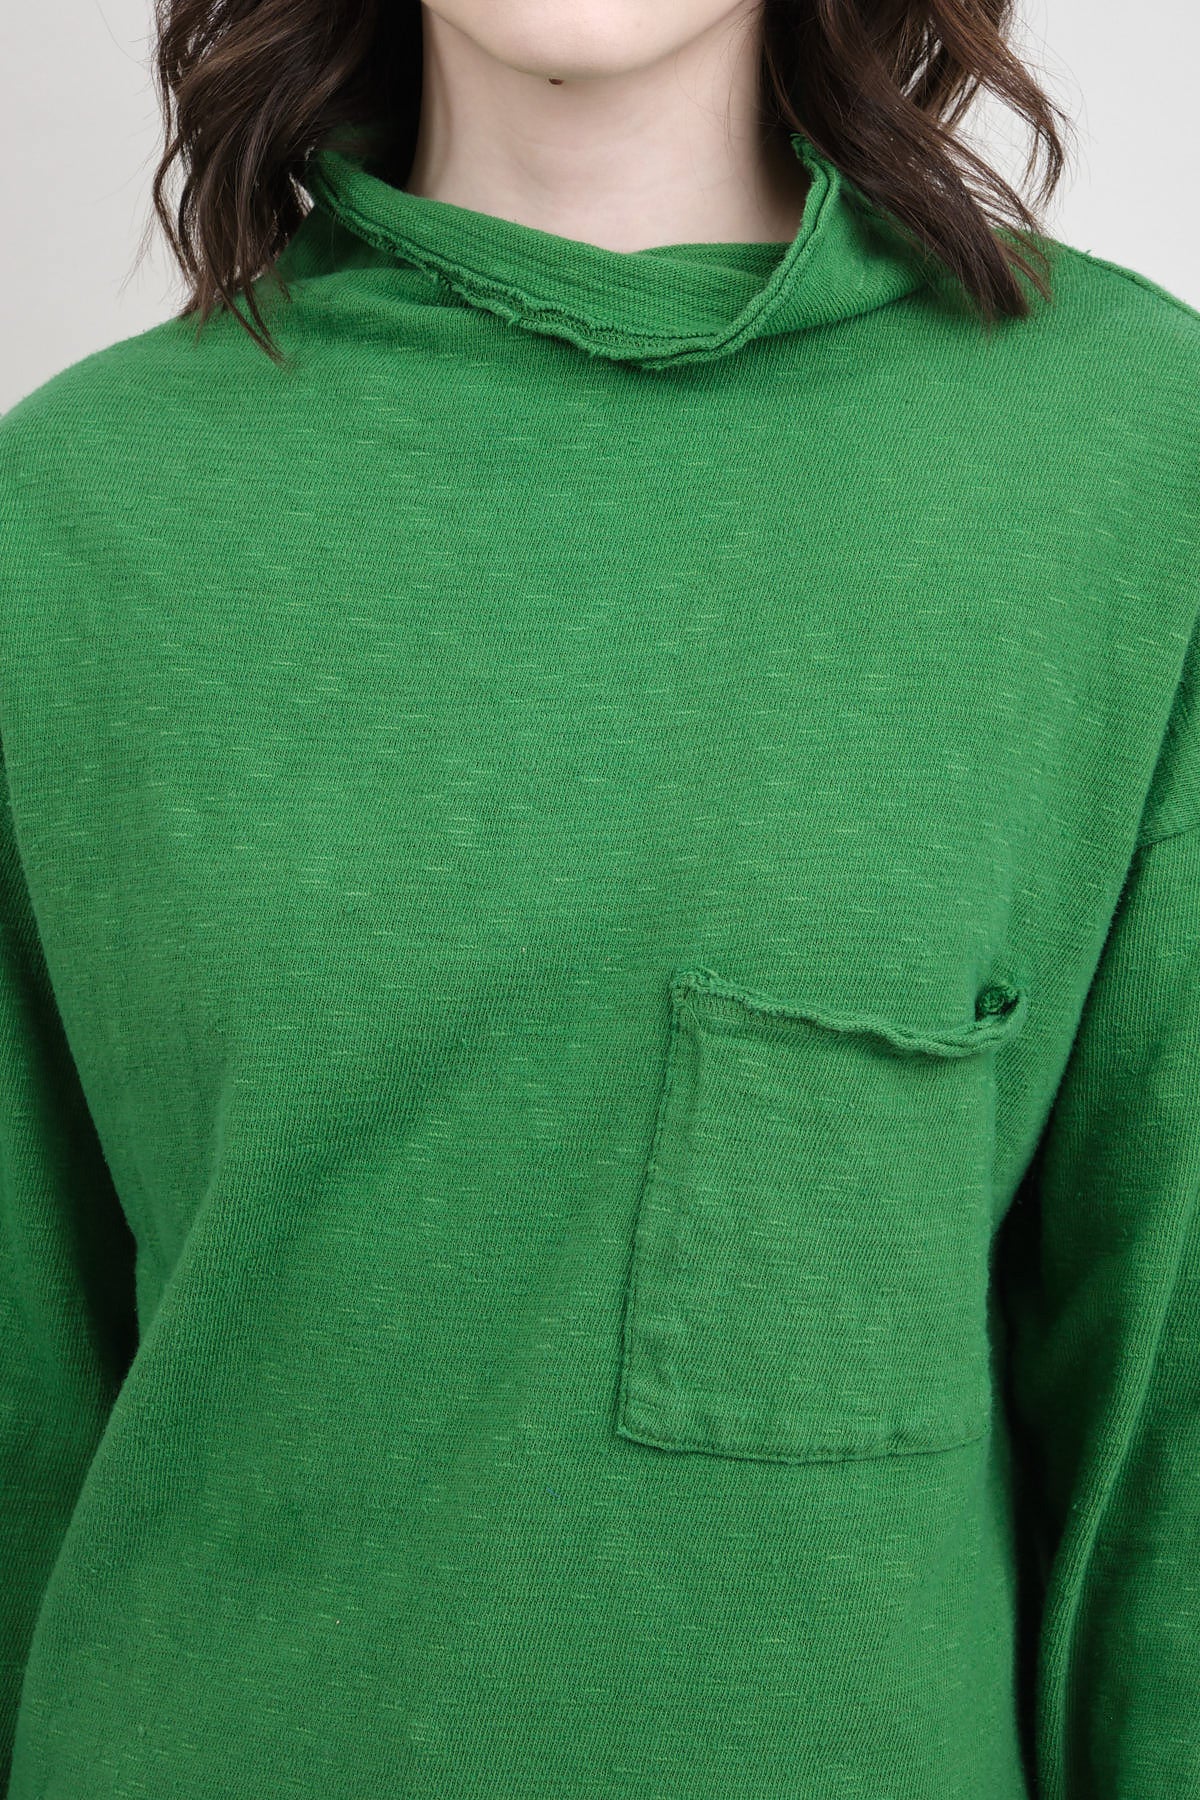 Kapital green mock neck long sleeve T with front pocket in green